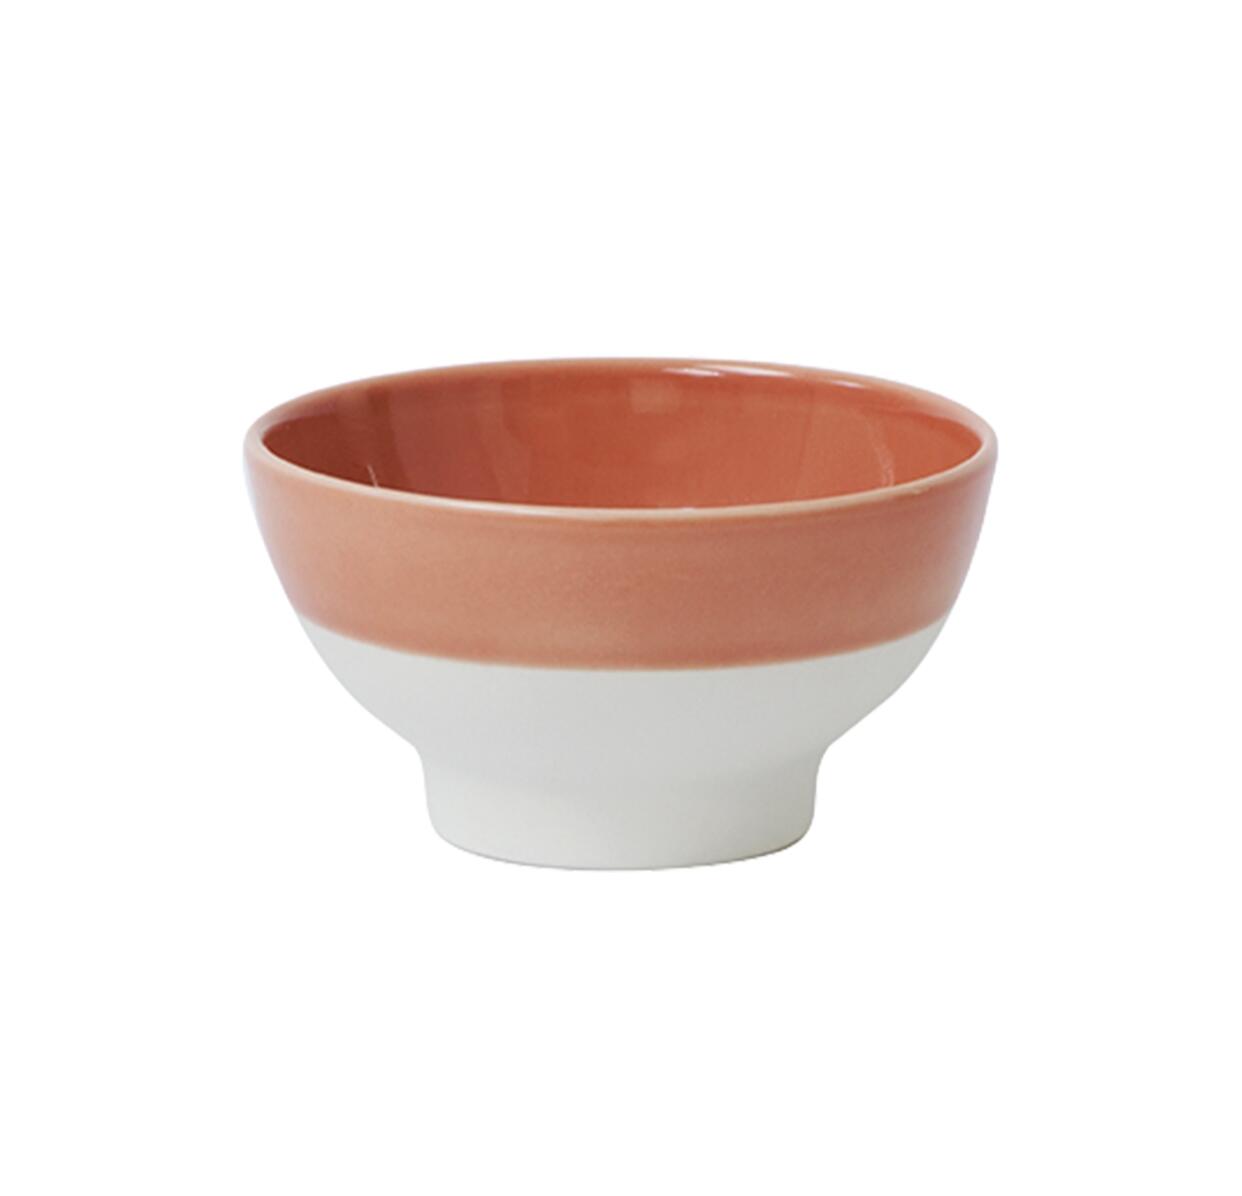 Bowl Cantine terre cuite by Jars Céramistes, French ceramics manufacturer